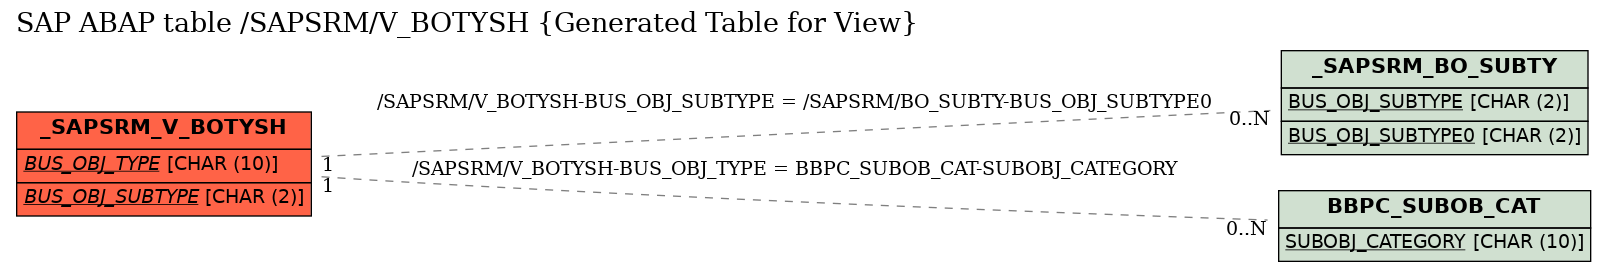 E-R Diagram for table /SAPSRM/V_BOTYSH (Generated Table for View)